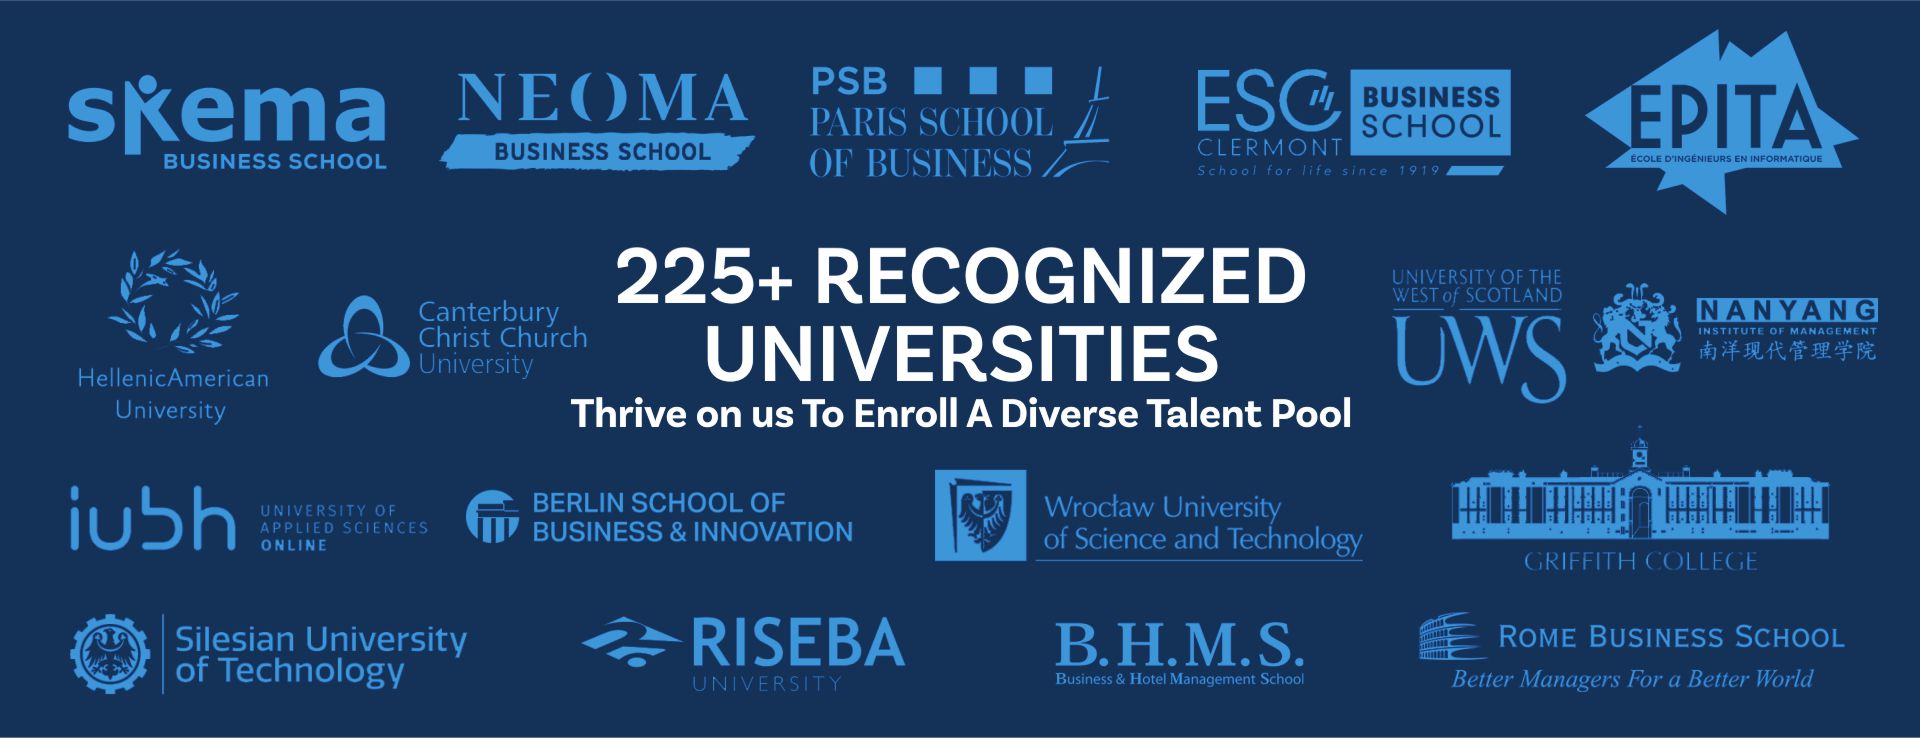 225+ Recognized Universities For Study in Europe